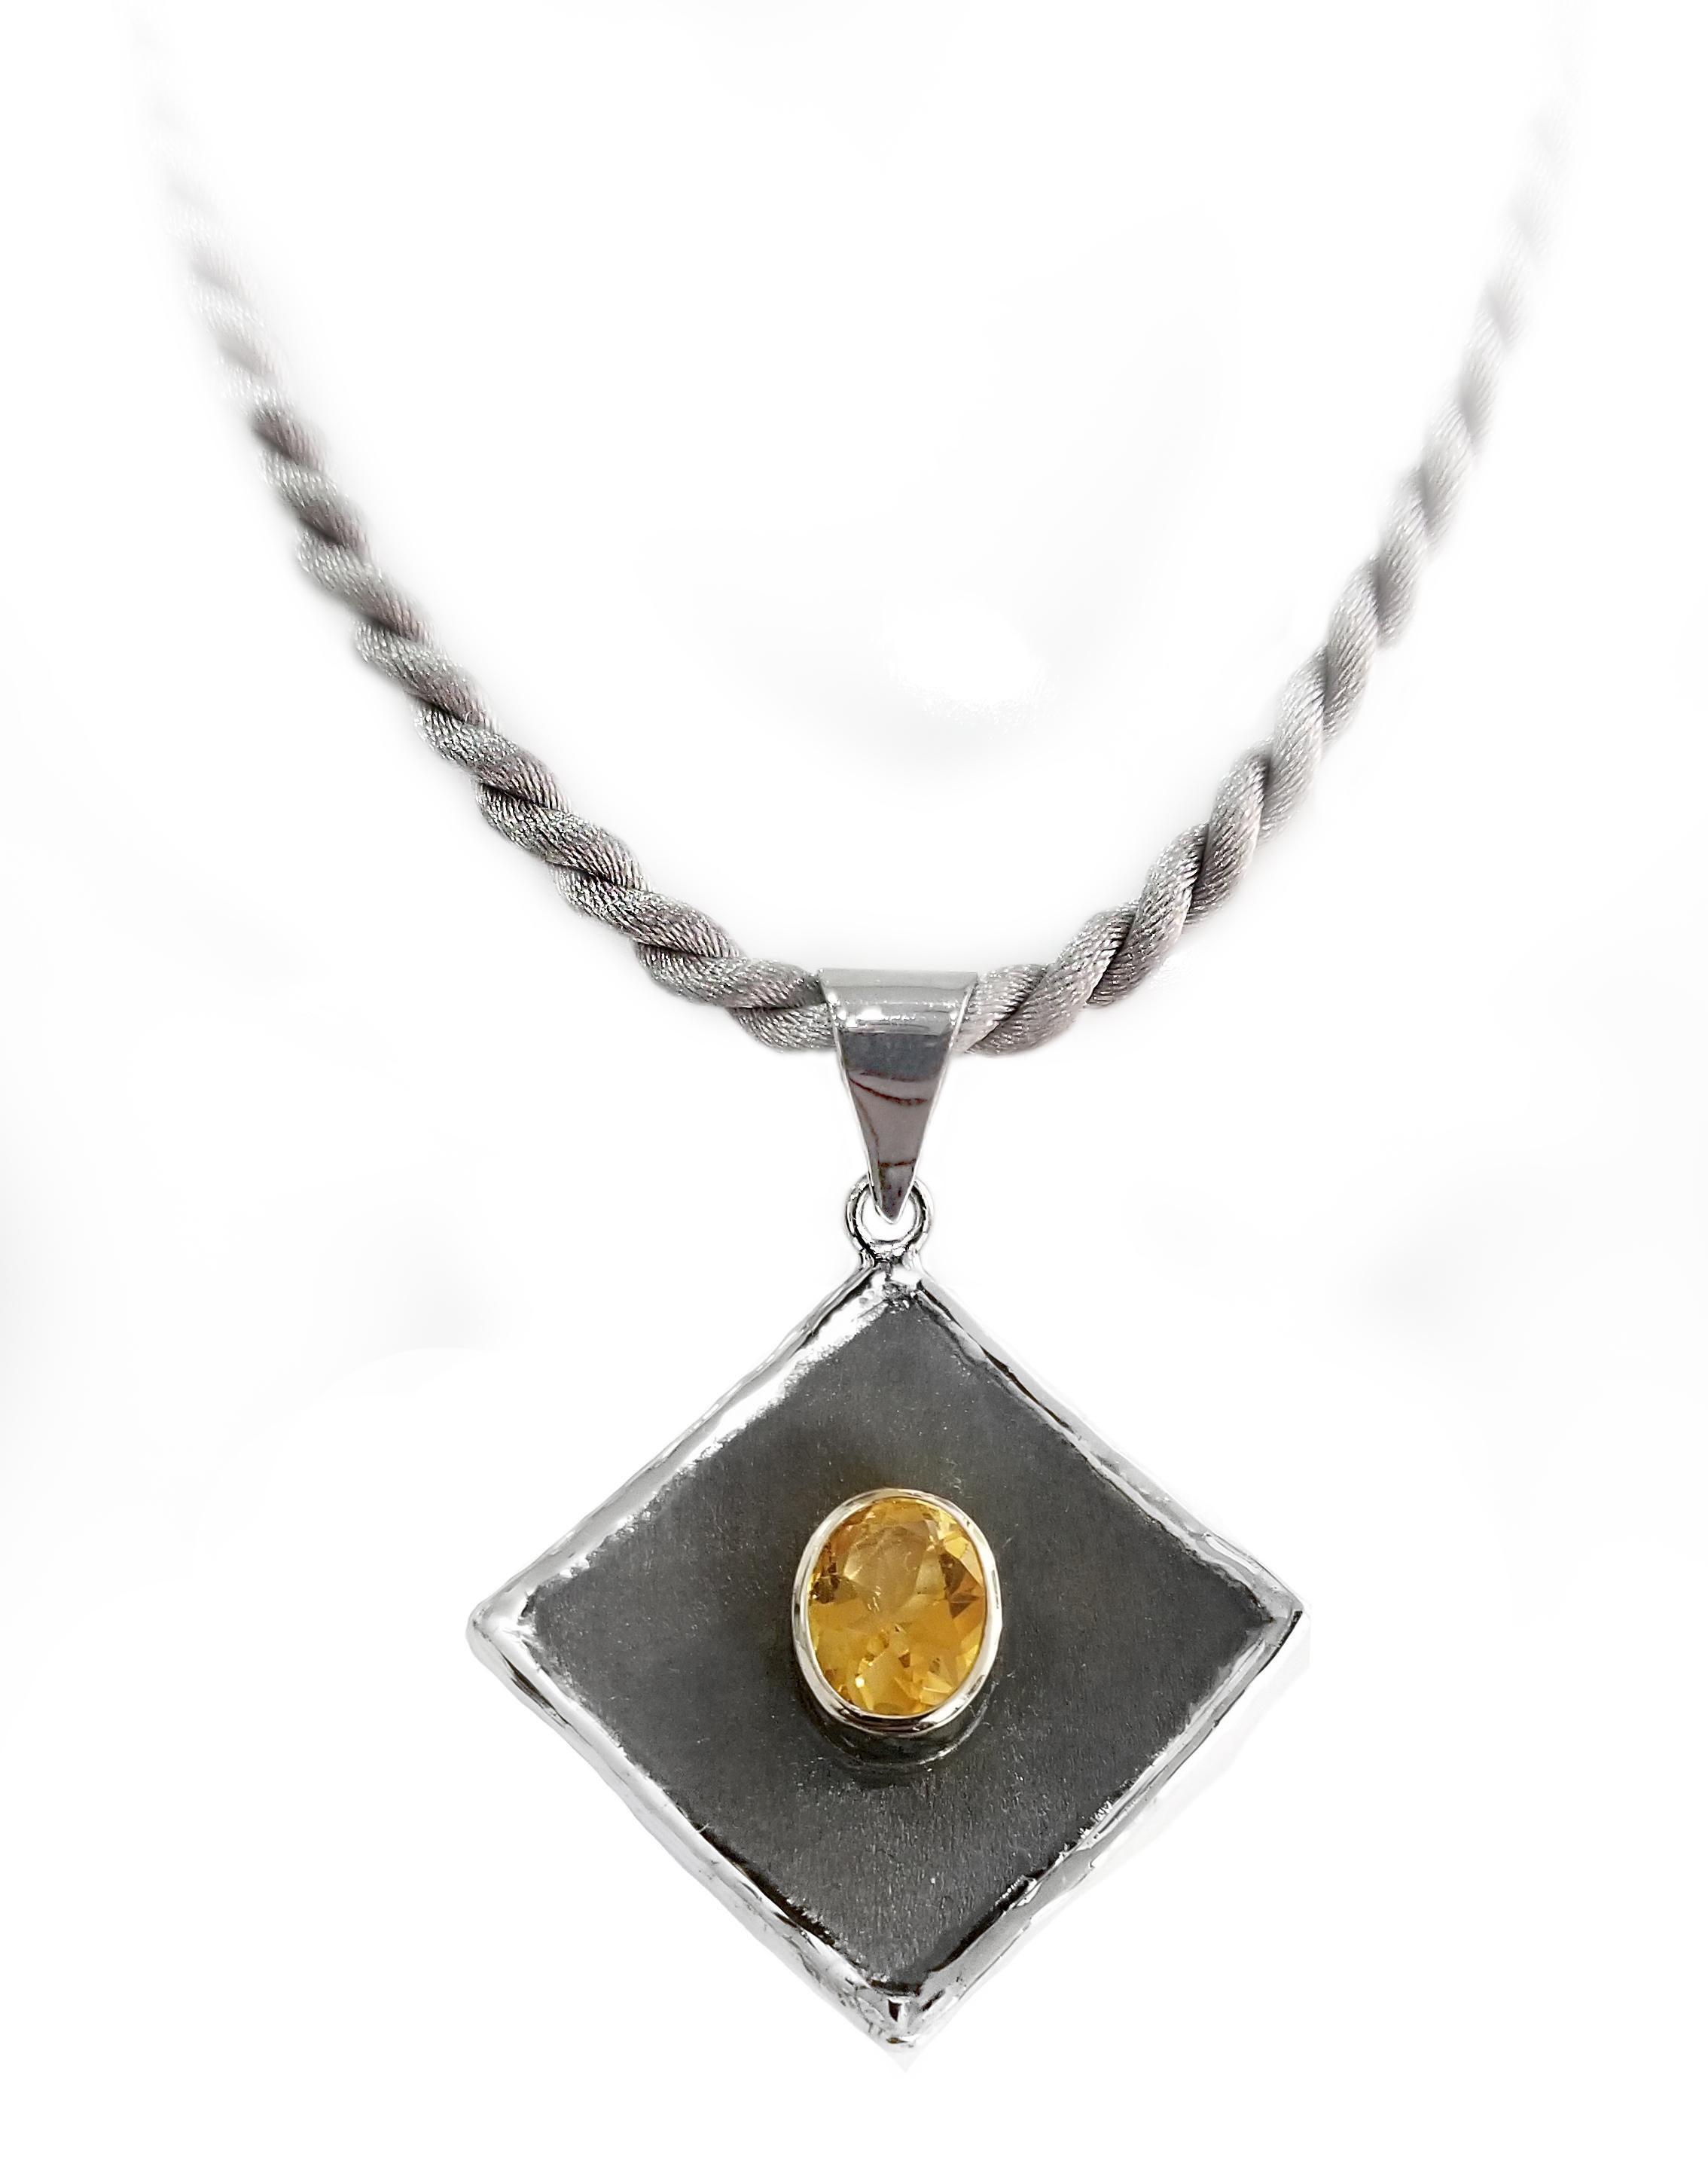 Yianni Creations Hephestos Collection 100% Handmade Artisan Pendant from Fine Silver featuring 1.75 Carat Oval Cut Citrine contrasting on Black Oxidized background. Gem get complemented by unique techniques of craftsmanship - brushed texture and